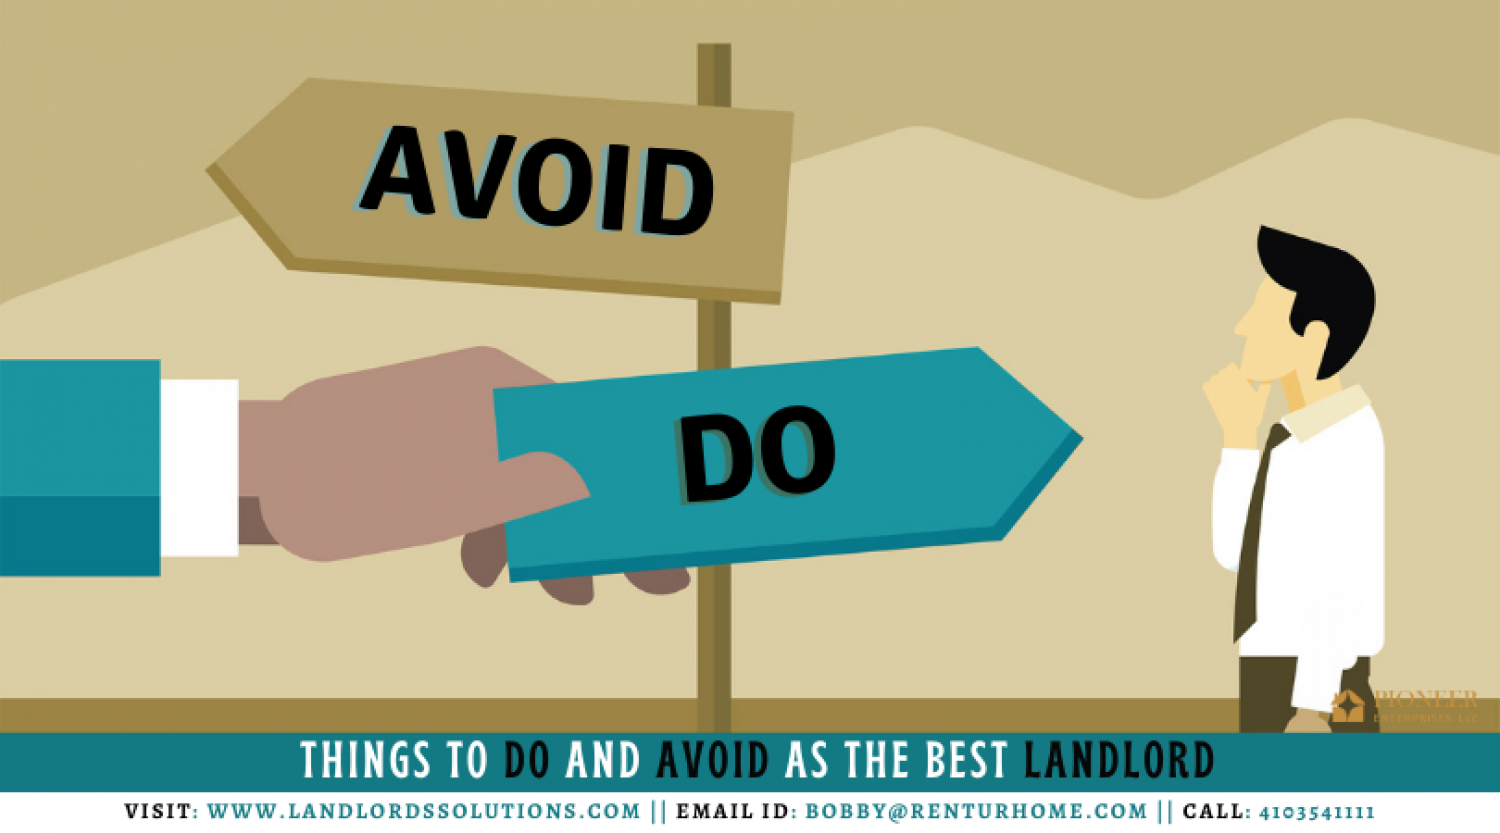 Things to Do and Avoid As the Best Landlord Infographic